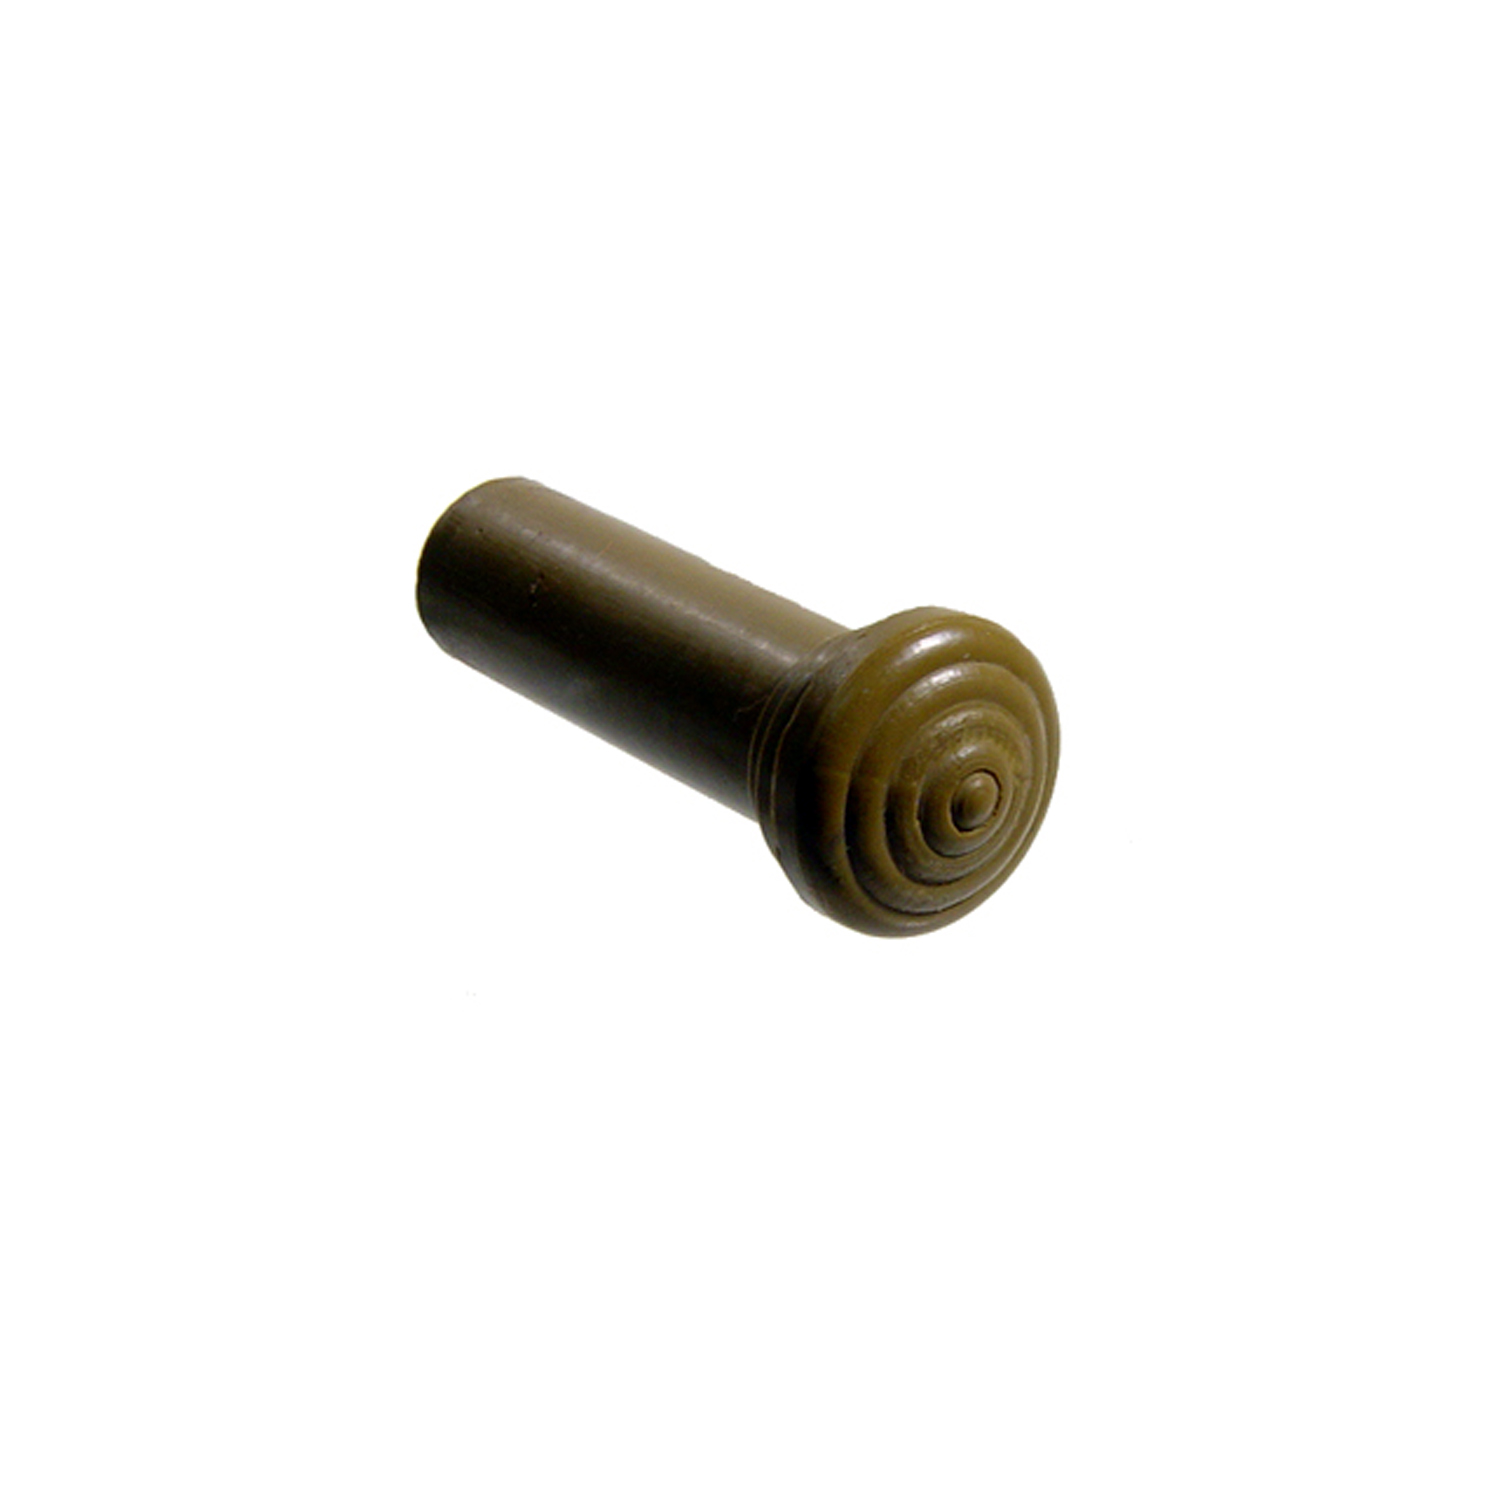 1950 Oldsmobile 88 Door Lock Knob.  Made of Olive Green rubber, self-threading-RP 304-G